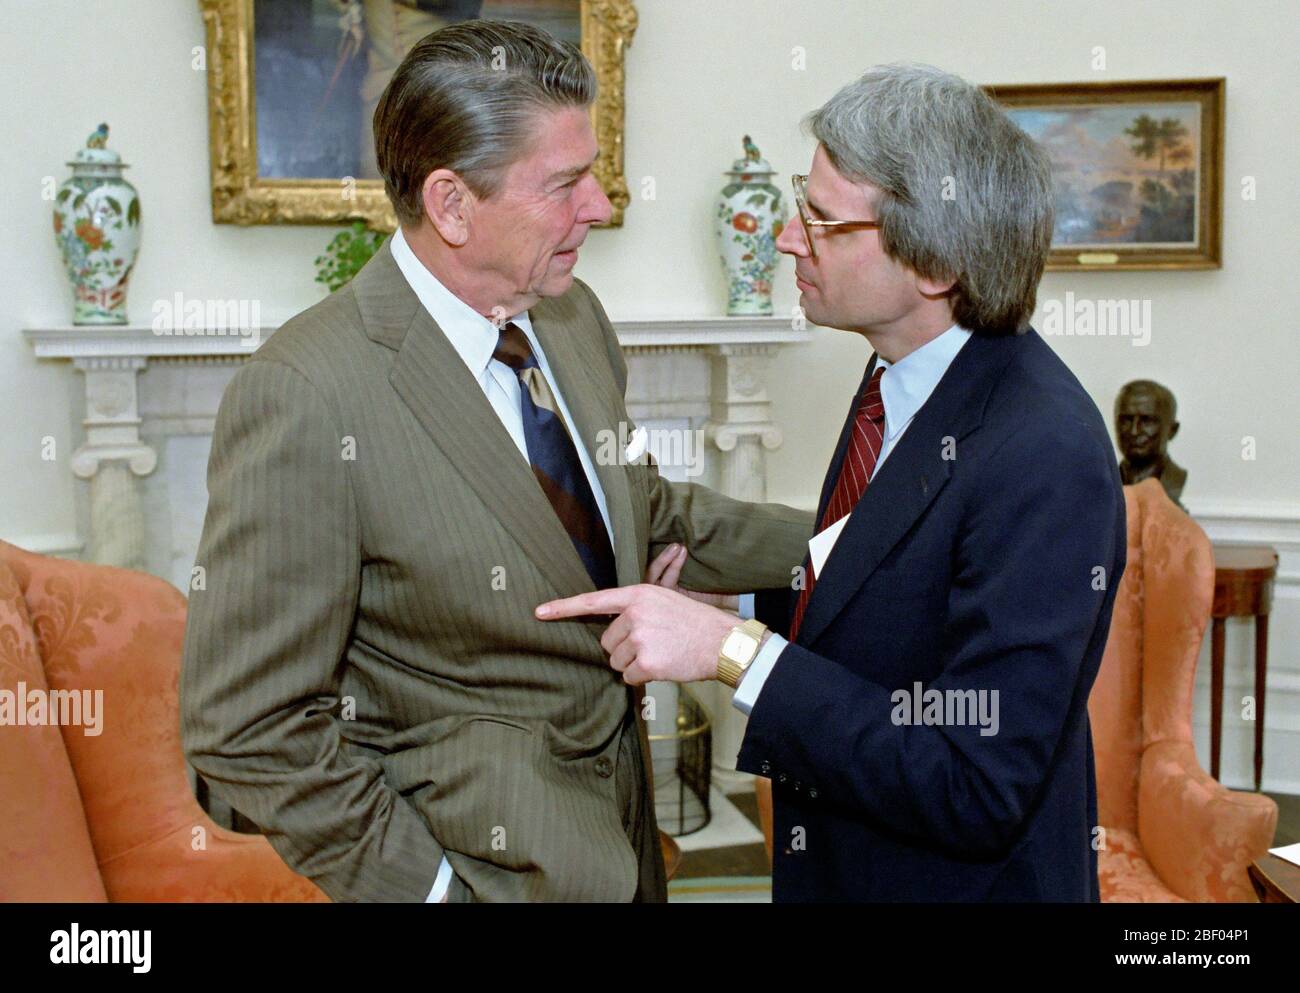 1/30/1981 President Reagan and David Stockman meeting on the economy in the Oval Office Stock Photo